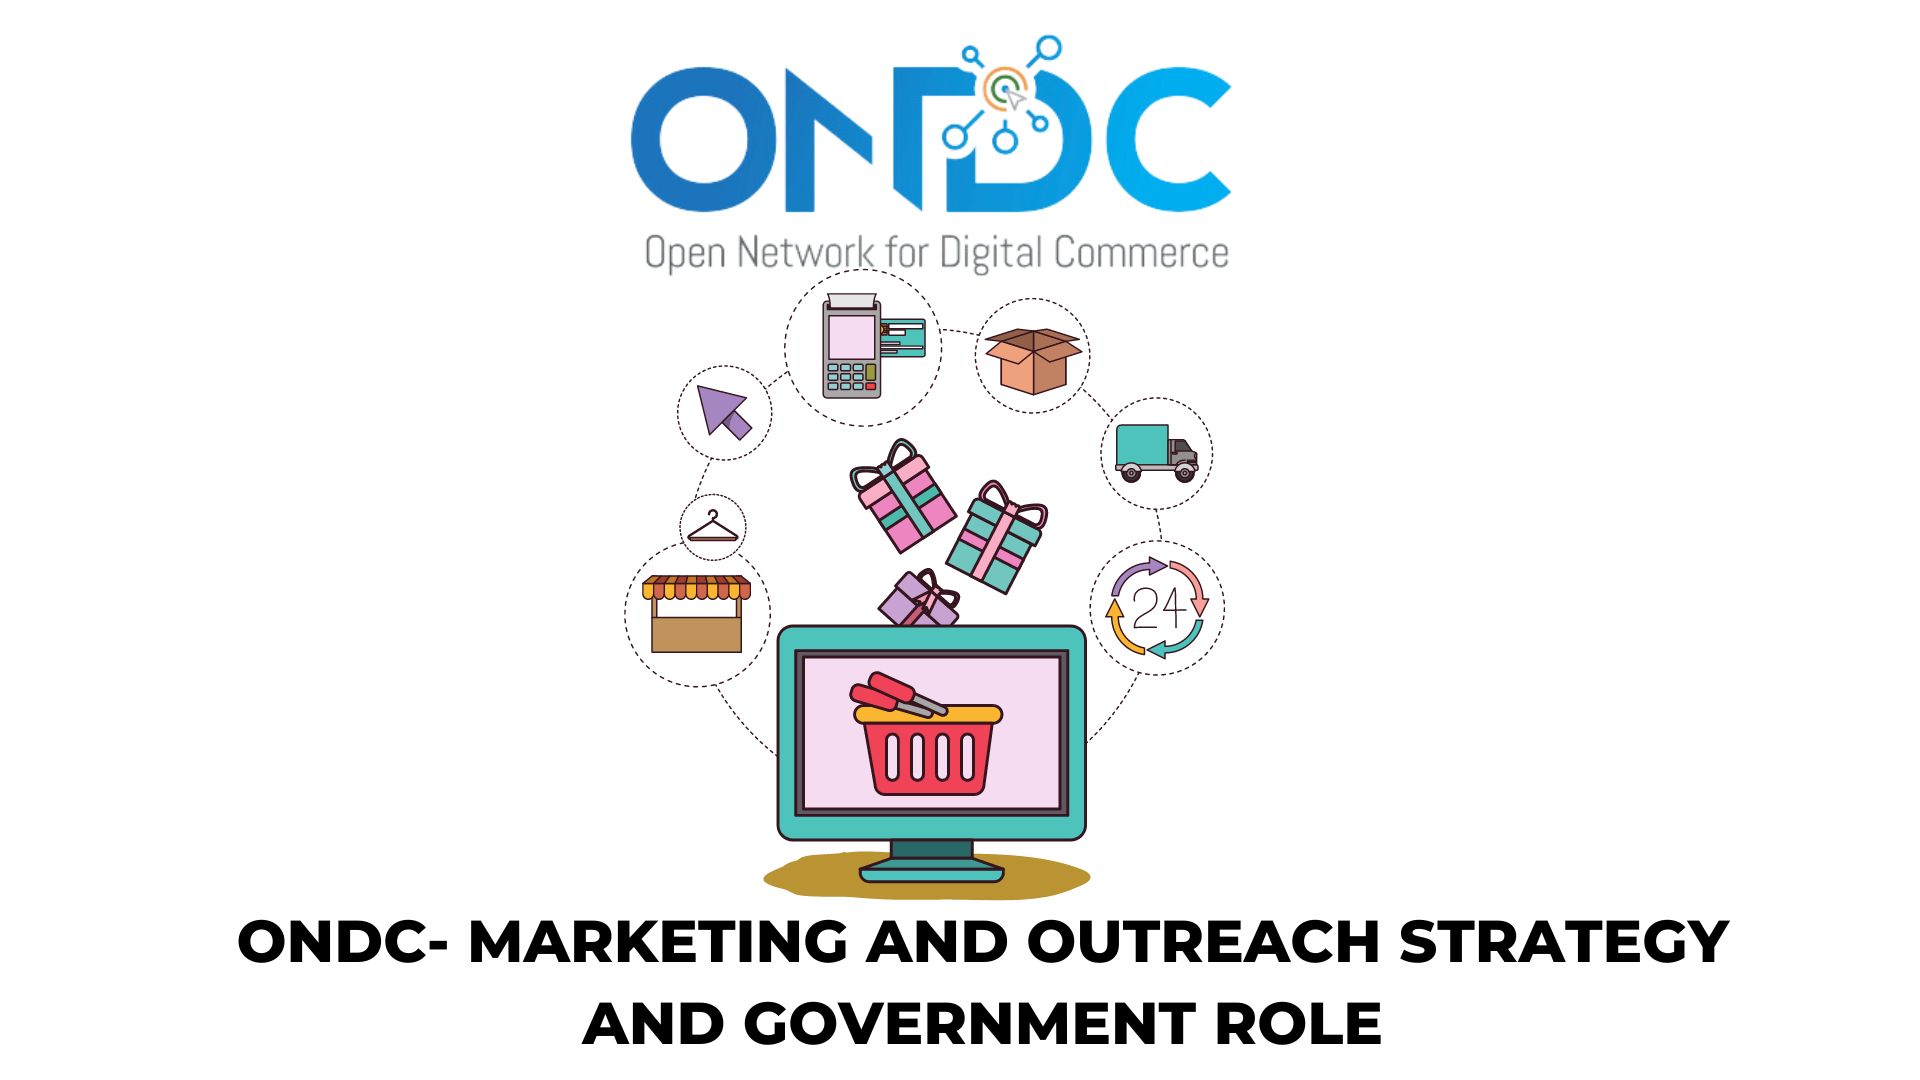 Marketing and outreach strategy of ONDC